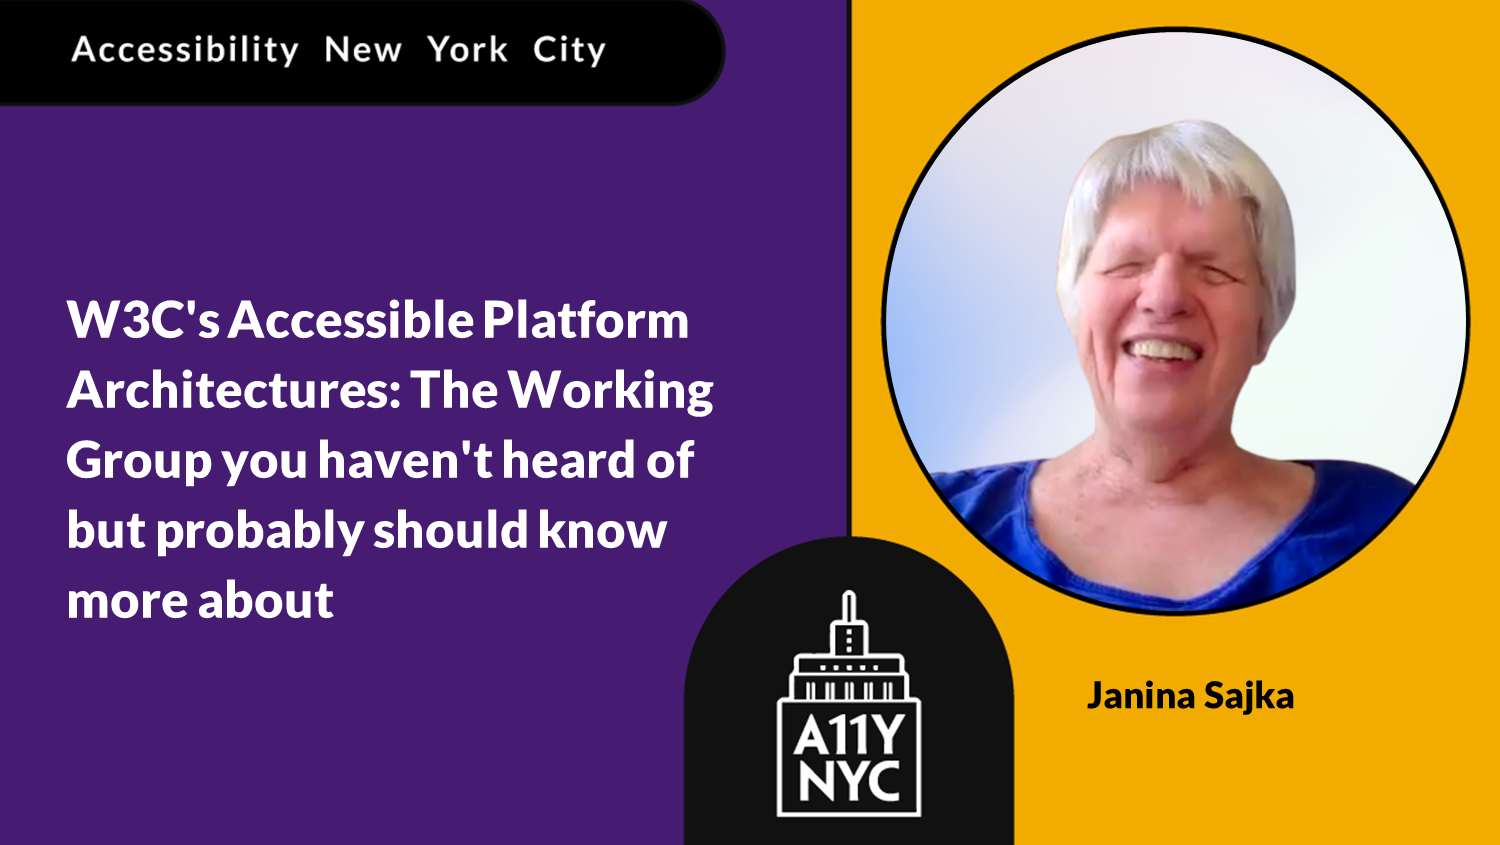 Accessibility New York City W3C's Accessible Platform Architectures: The Working Group you haven't heard of but probably should know more about with Janina Sajka who is a white woman with short white and a blue top